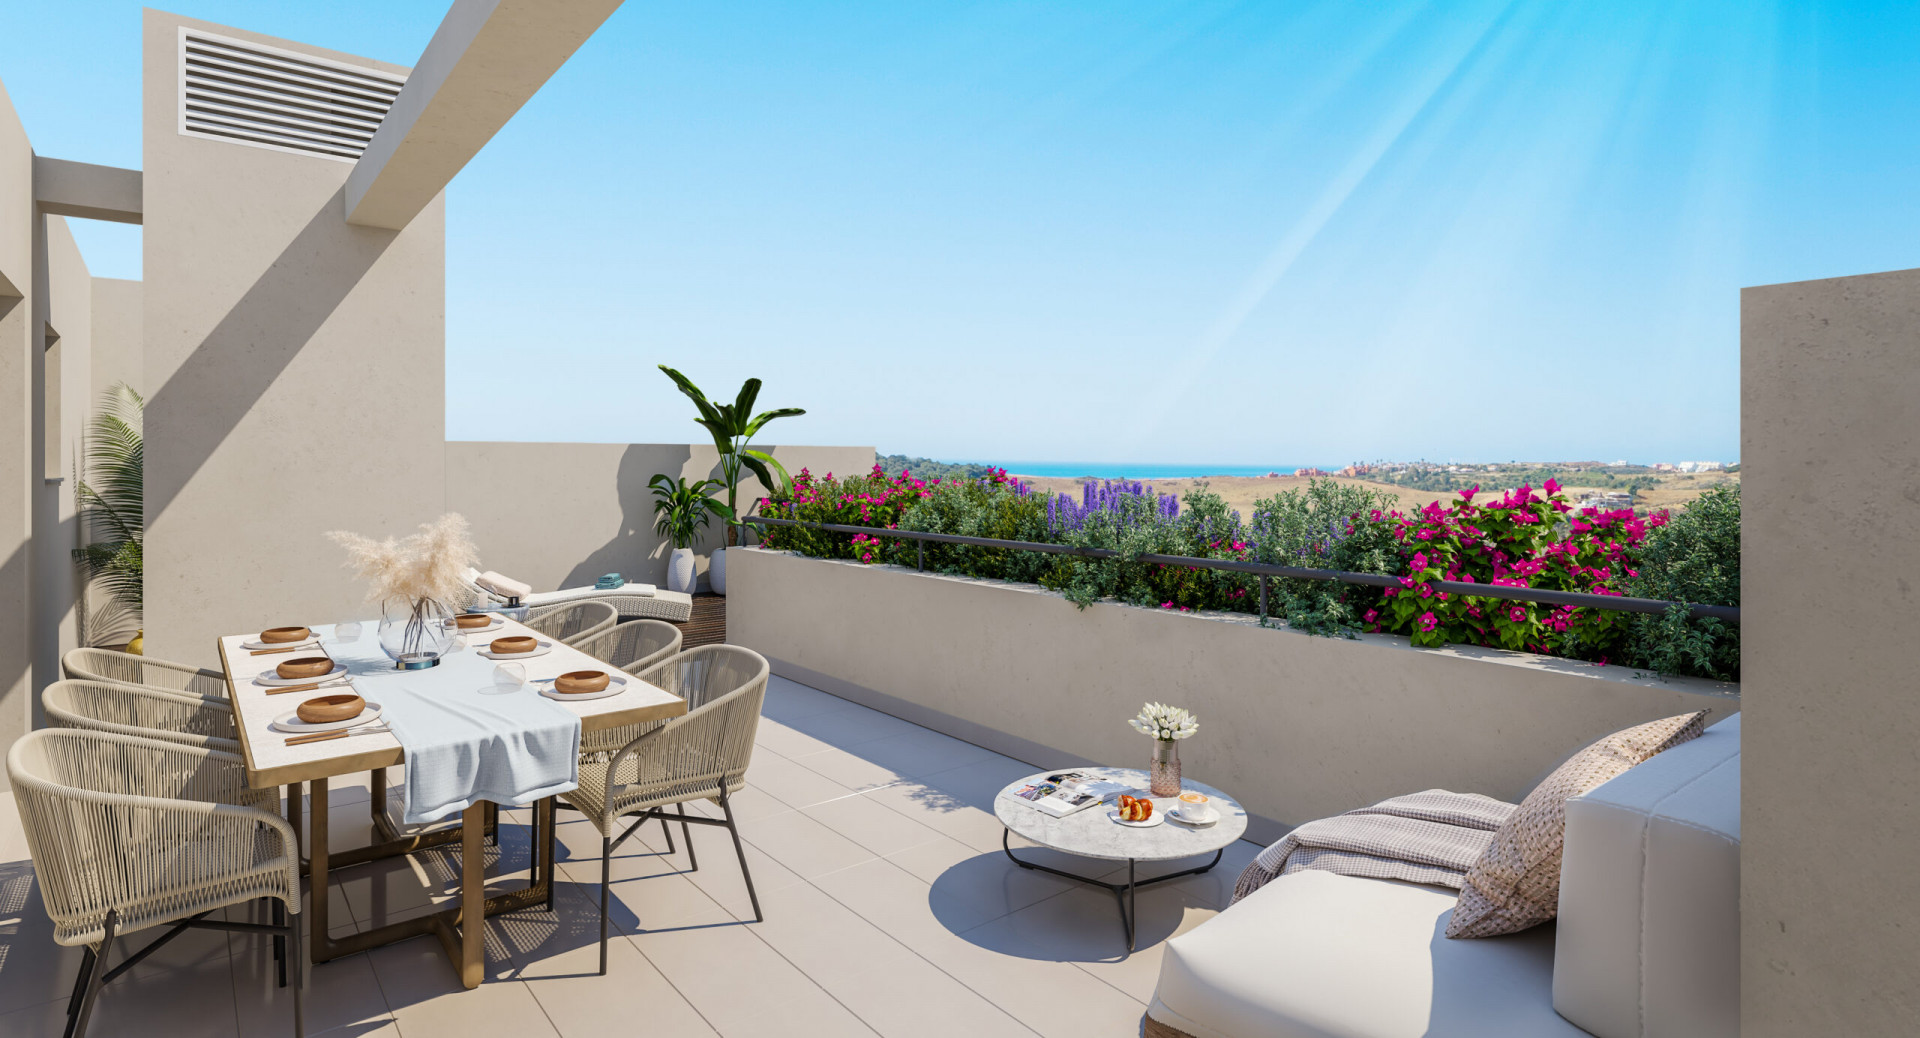 Apartments and duplex penthouses in a privileged location in Estepona